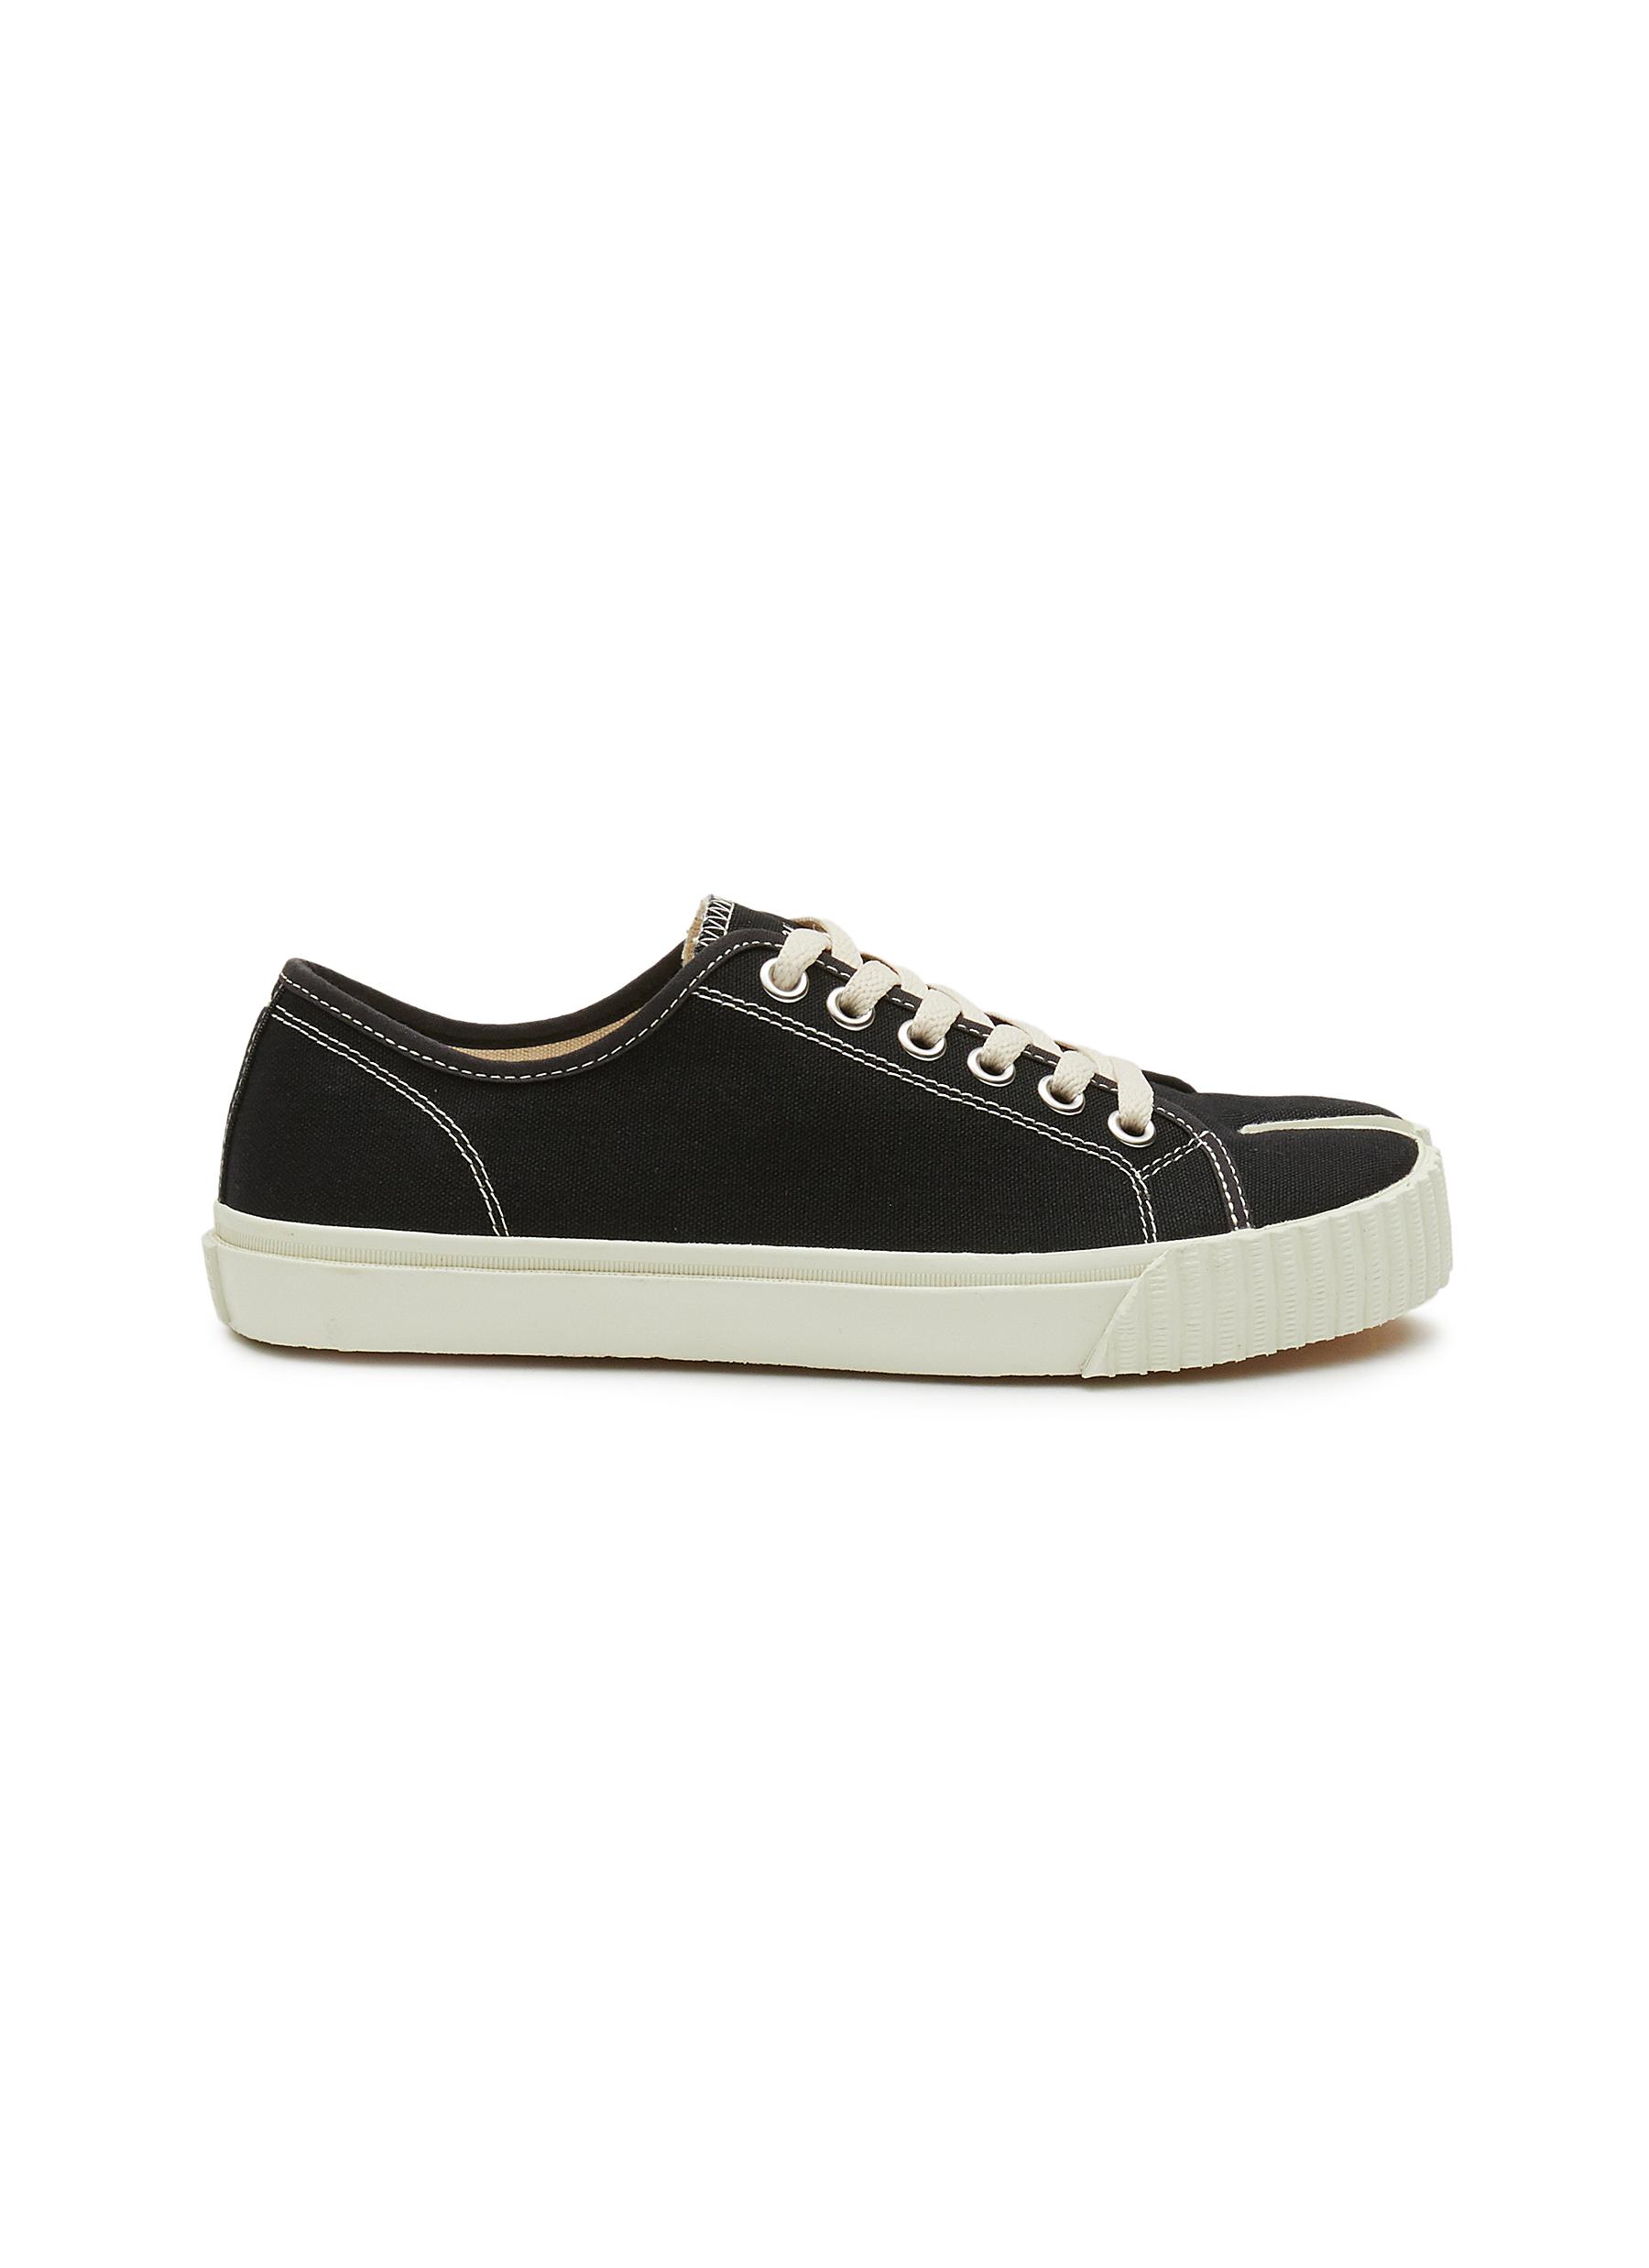 MAISON MARGIELA 'TABI' LOW TOP LACE UP SNEAKERS